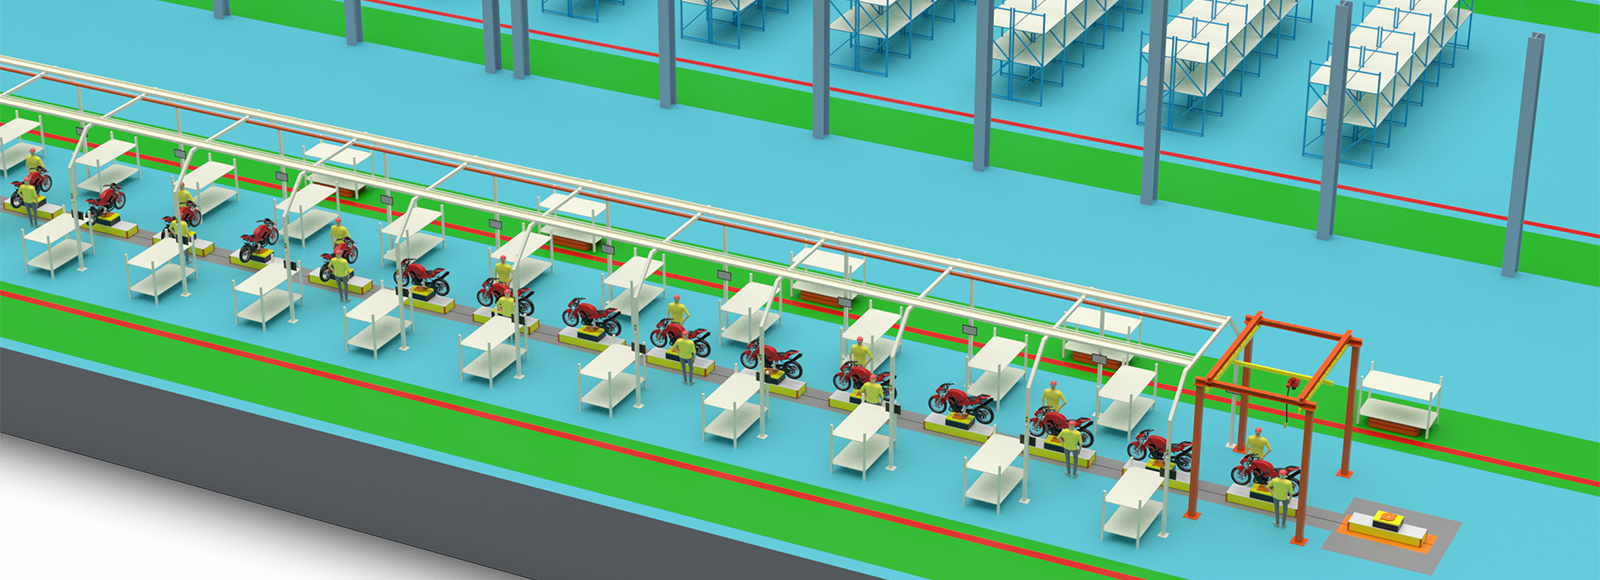 Production line for motorcycles